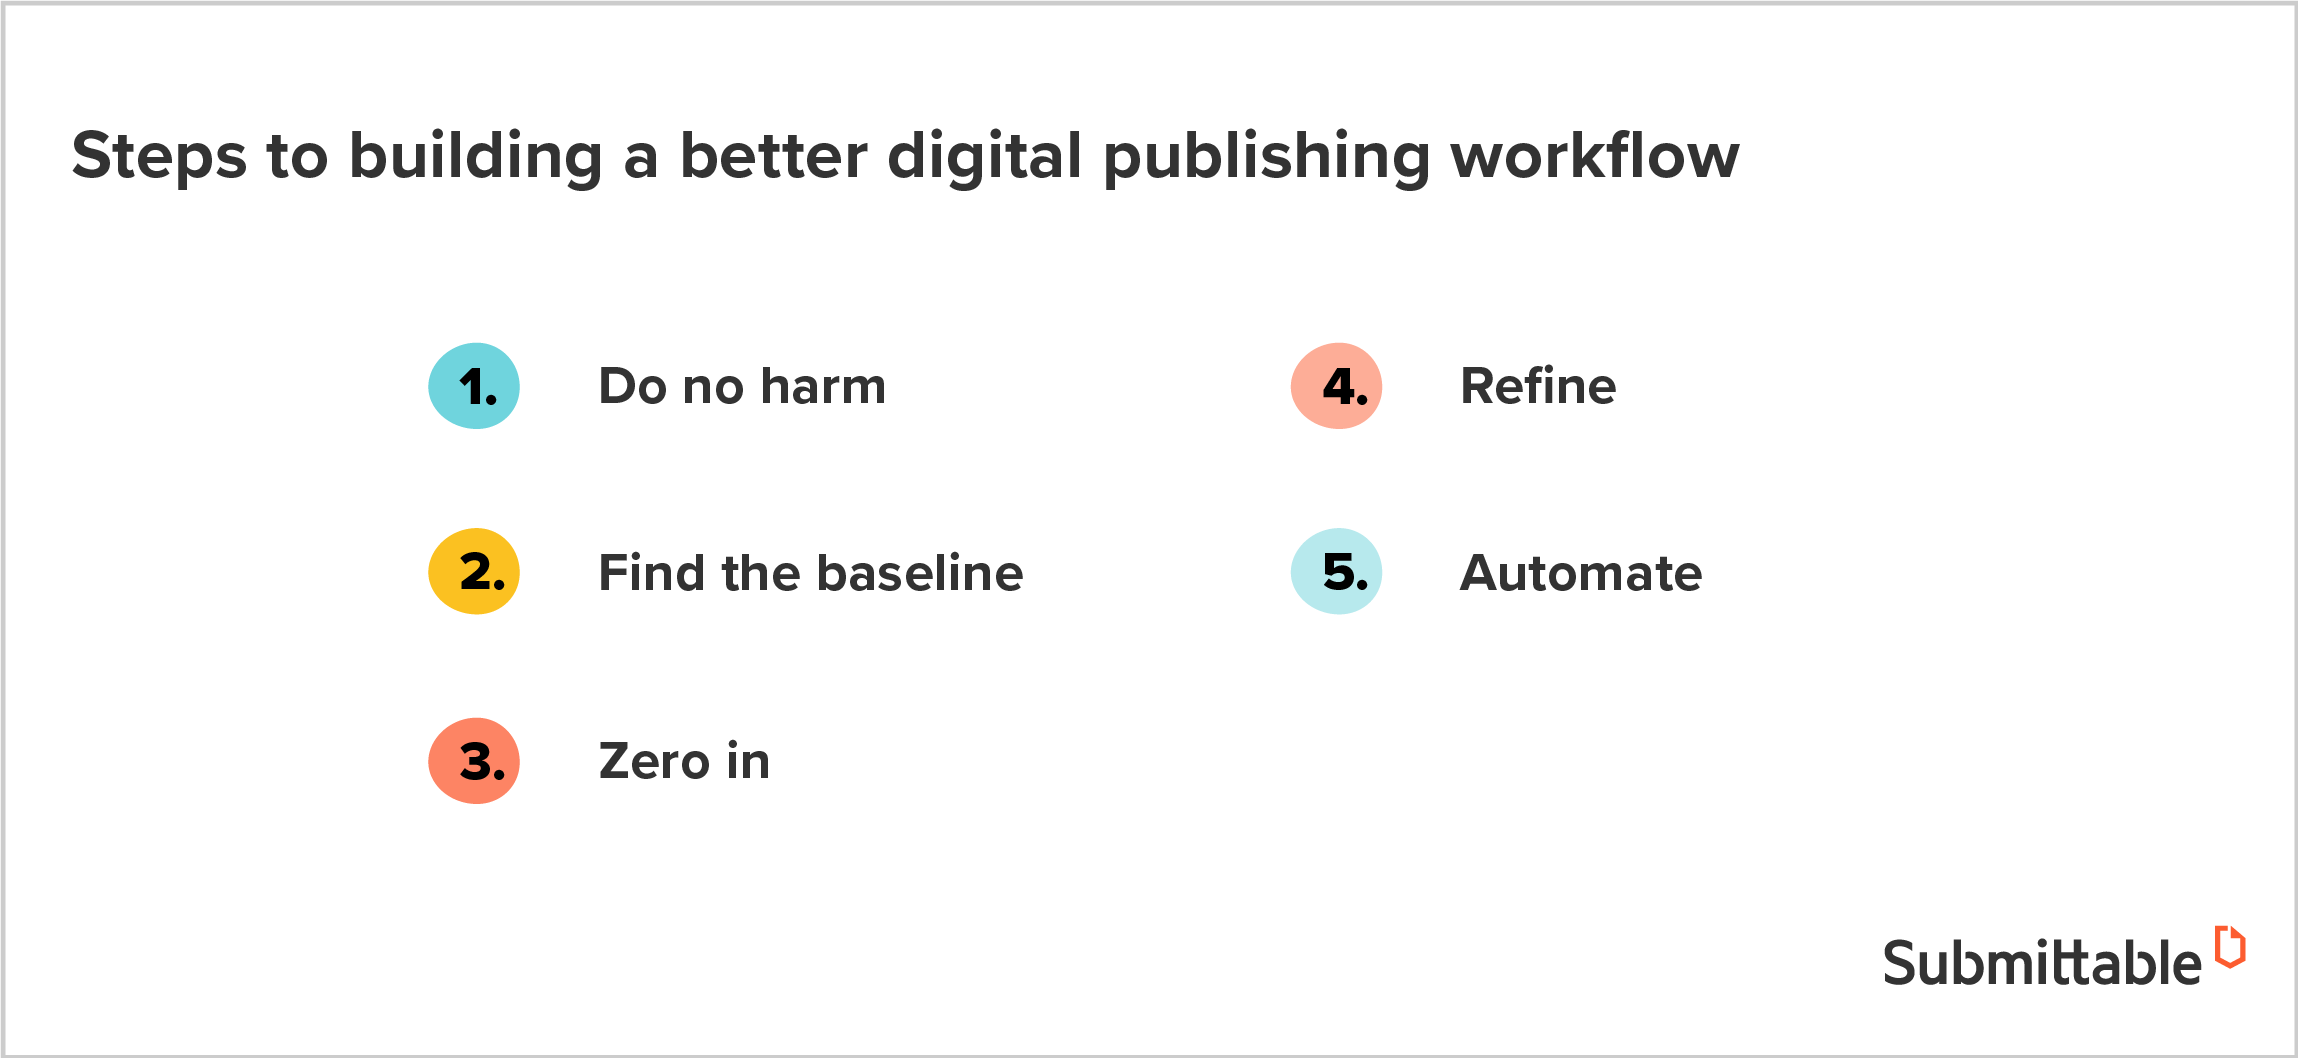 How to prepare for a new digital publishing workflow